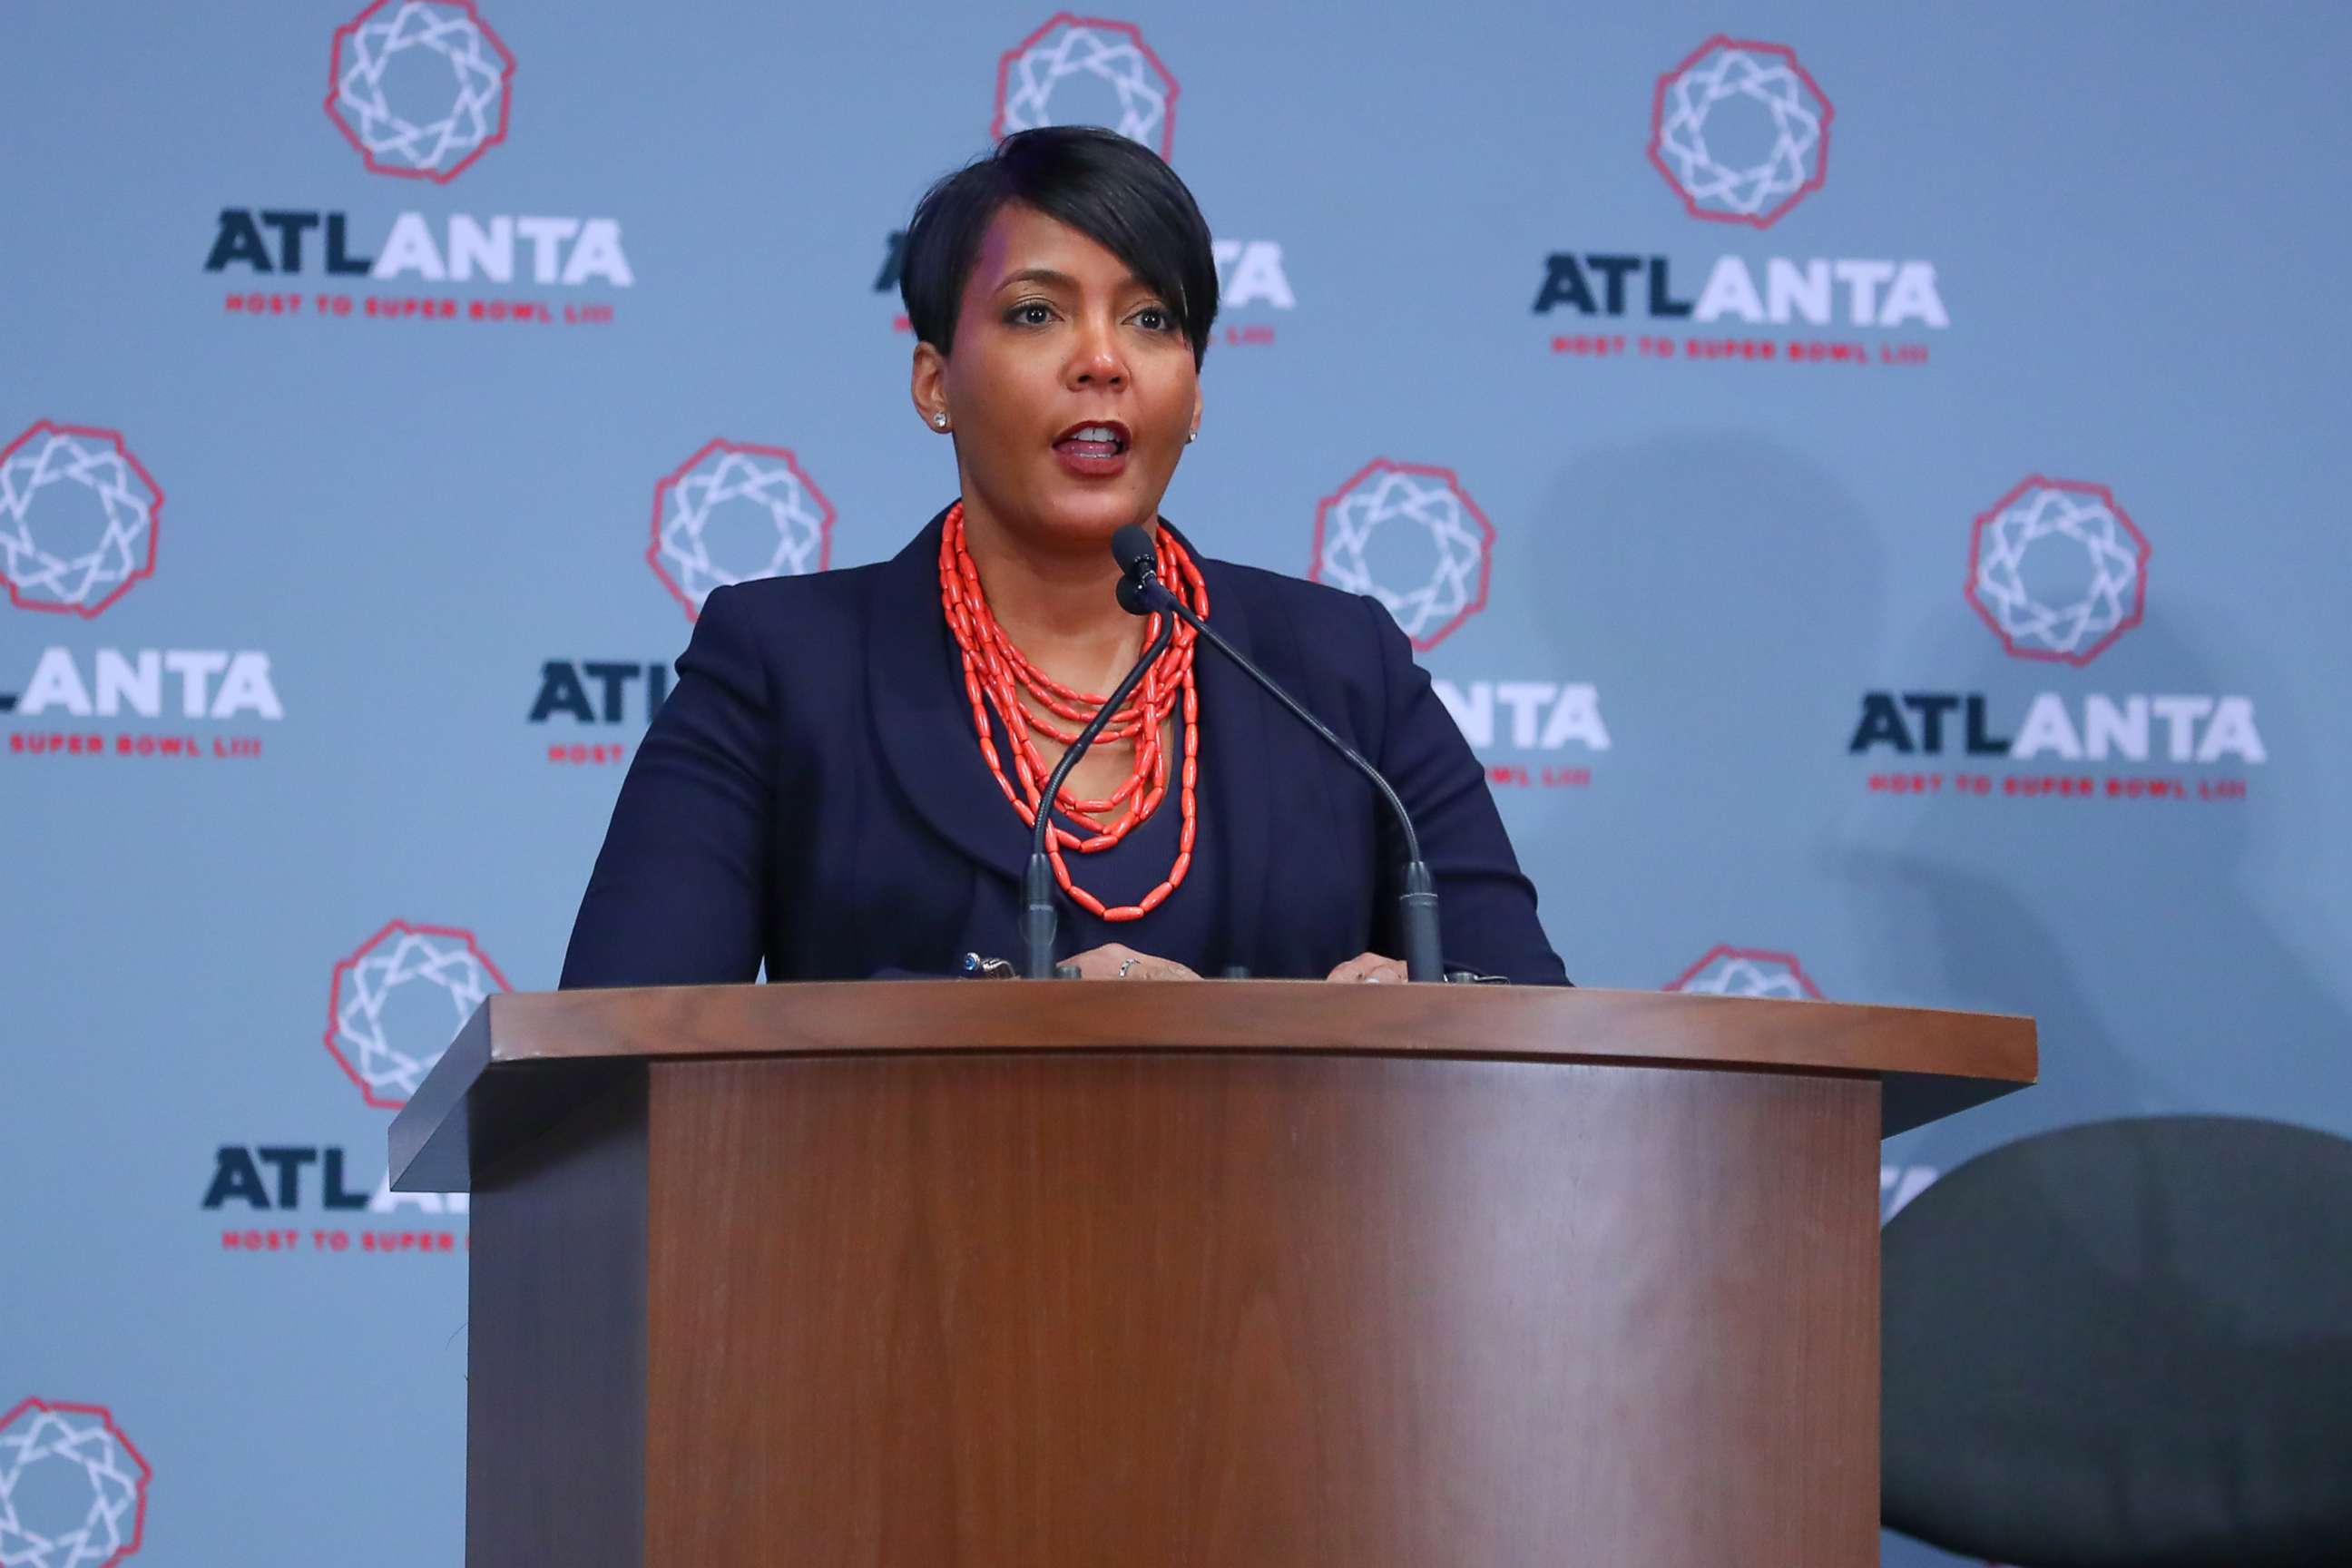 PHOTO: In this Jan. 28, 2019, file photo, City of Atlanta Mayor Keisha Lance Bottoms speaks during the Super Bowl LIII Atlanta Host Committee Press Conference at the Georgia World Congress Center in Atlanta.